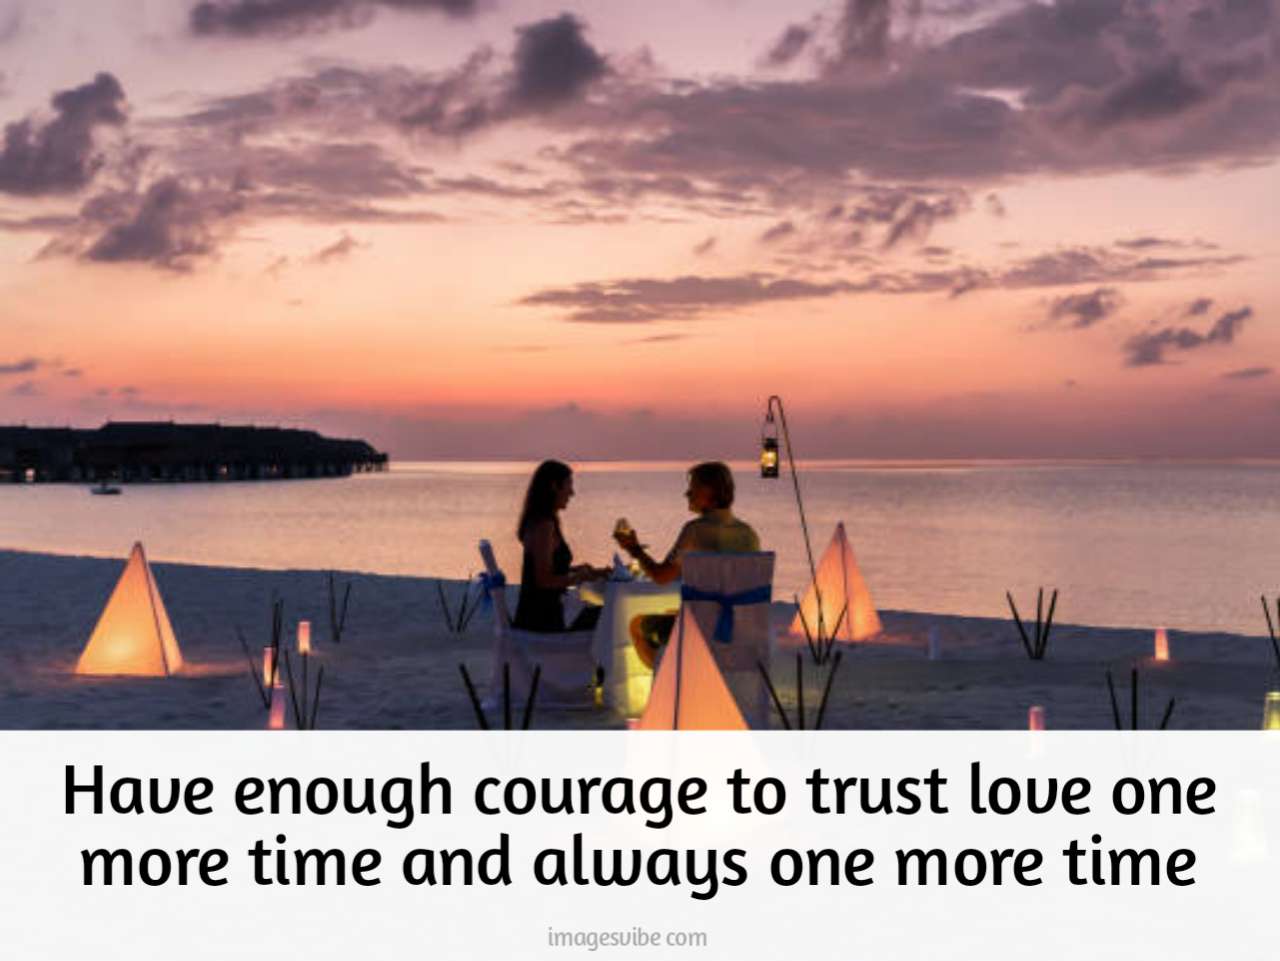 Romantic Images With Quotes11 